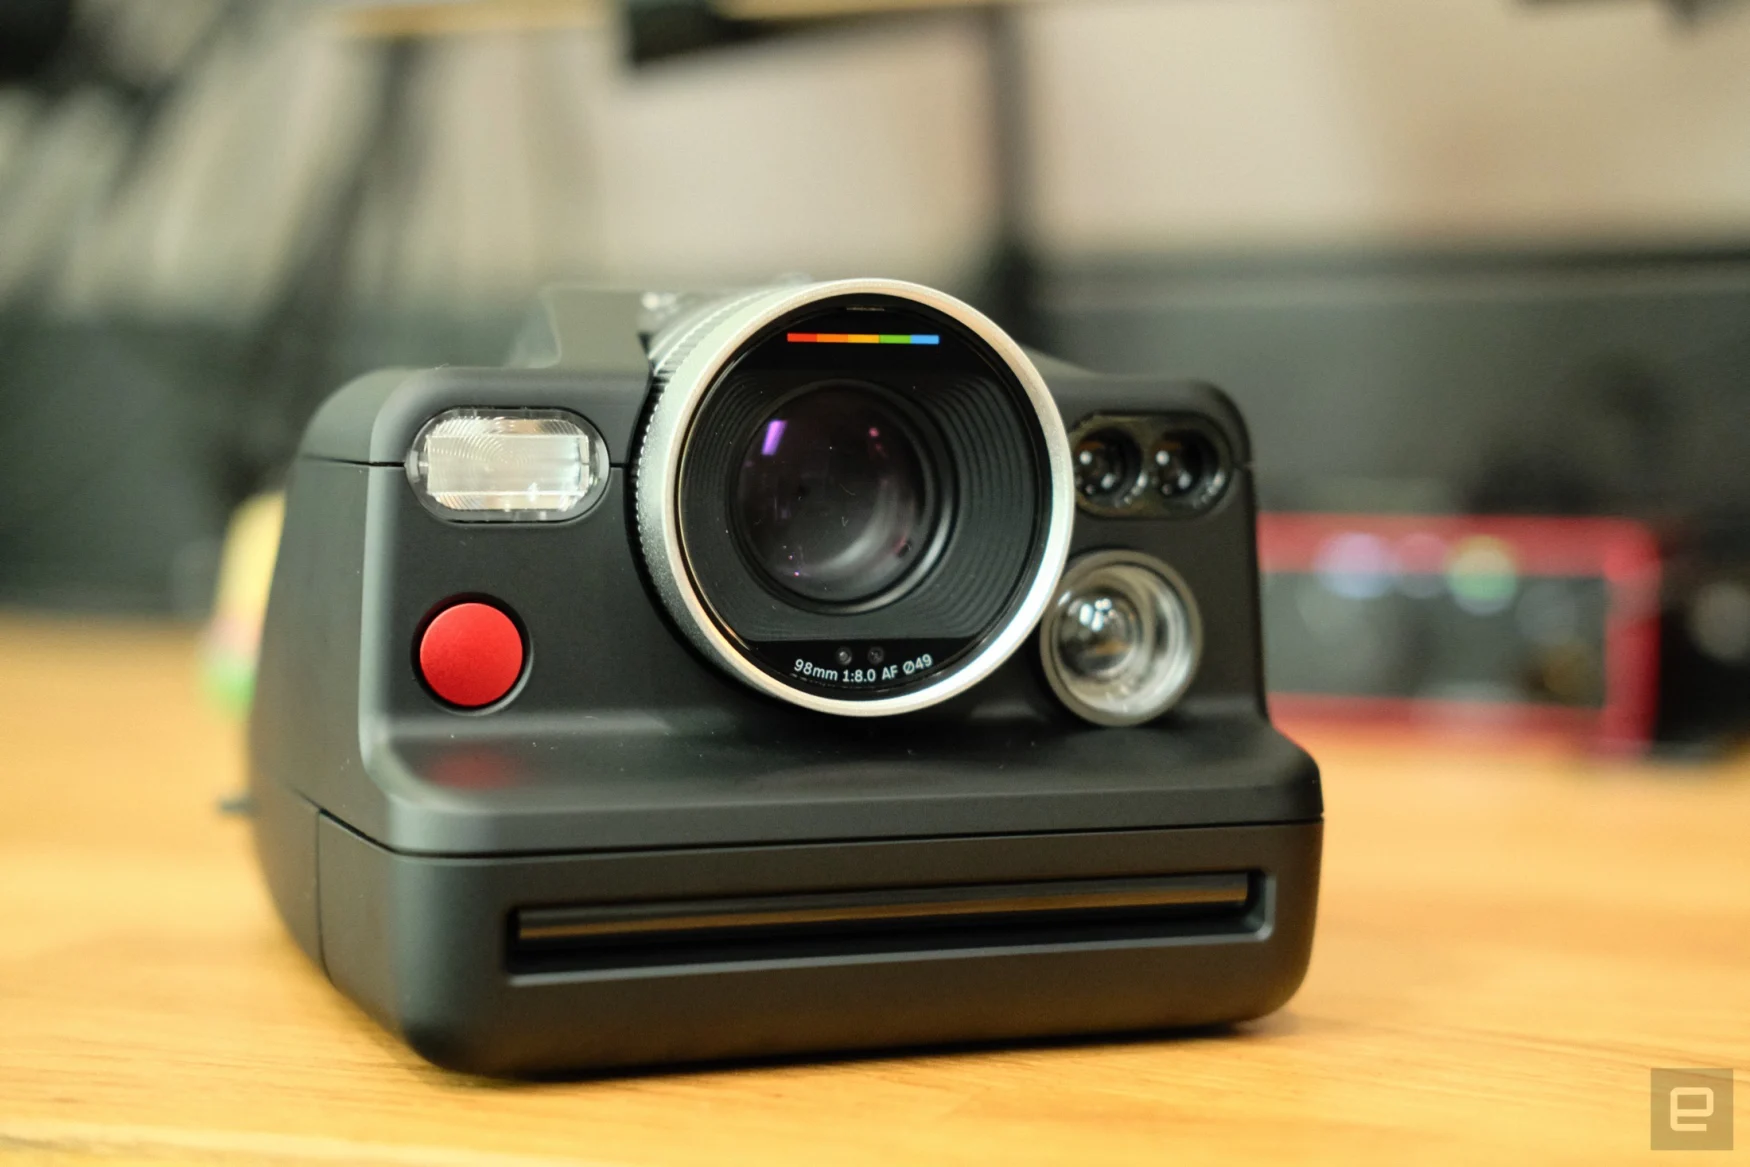 Front view of the Polaroid I-2 without lens cap.